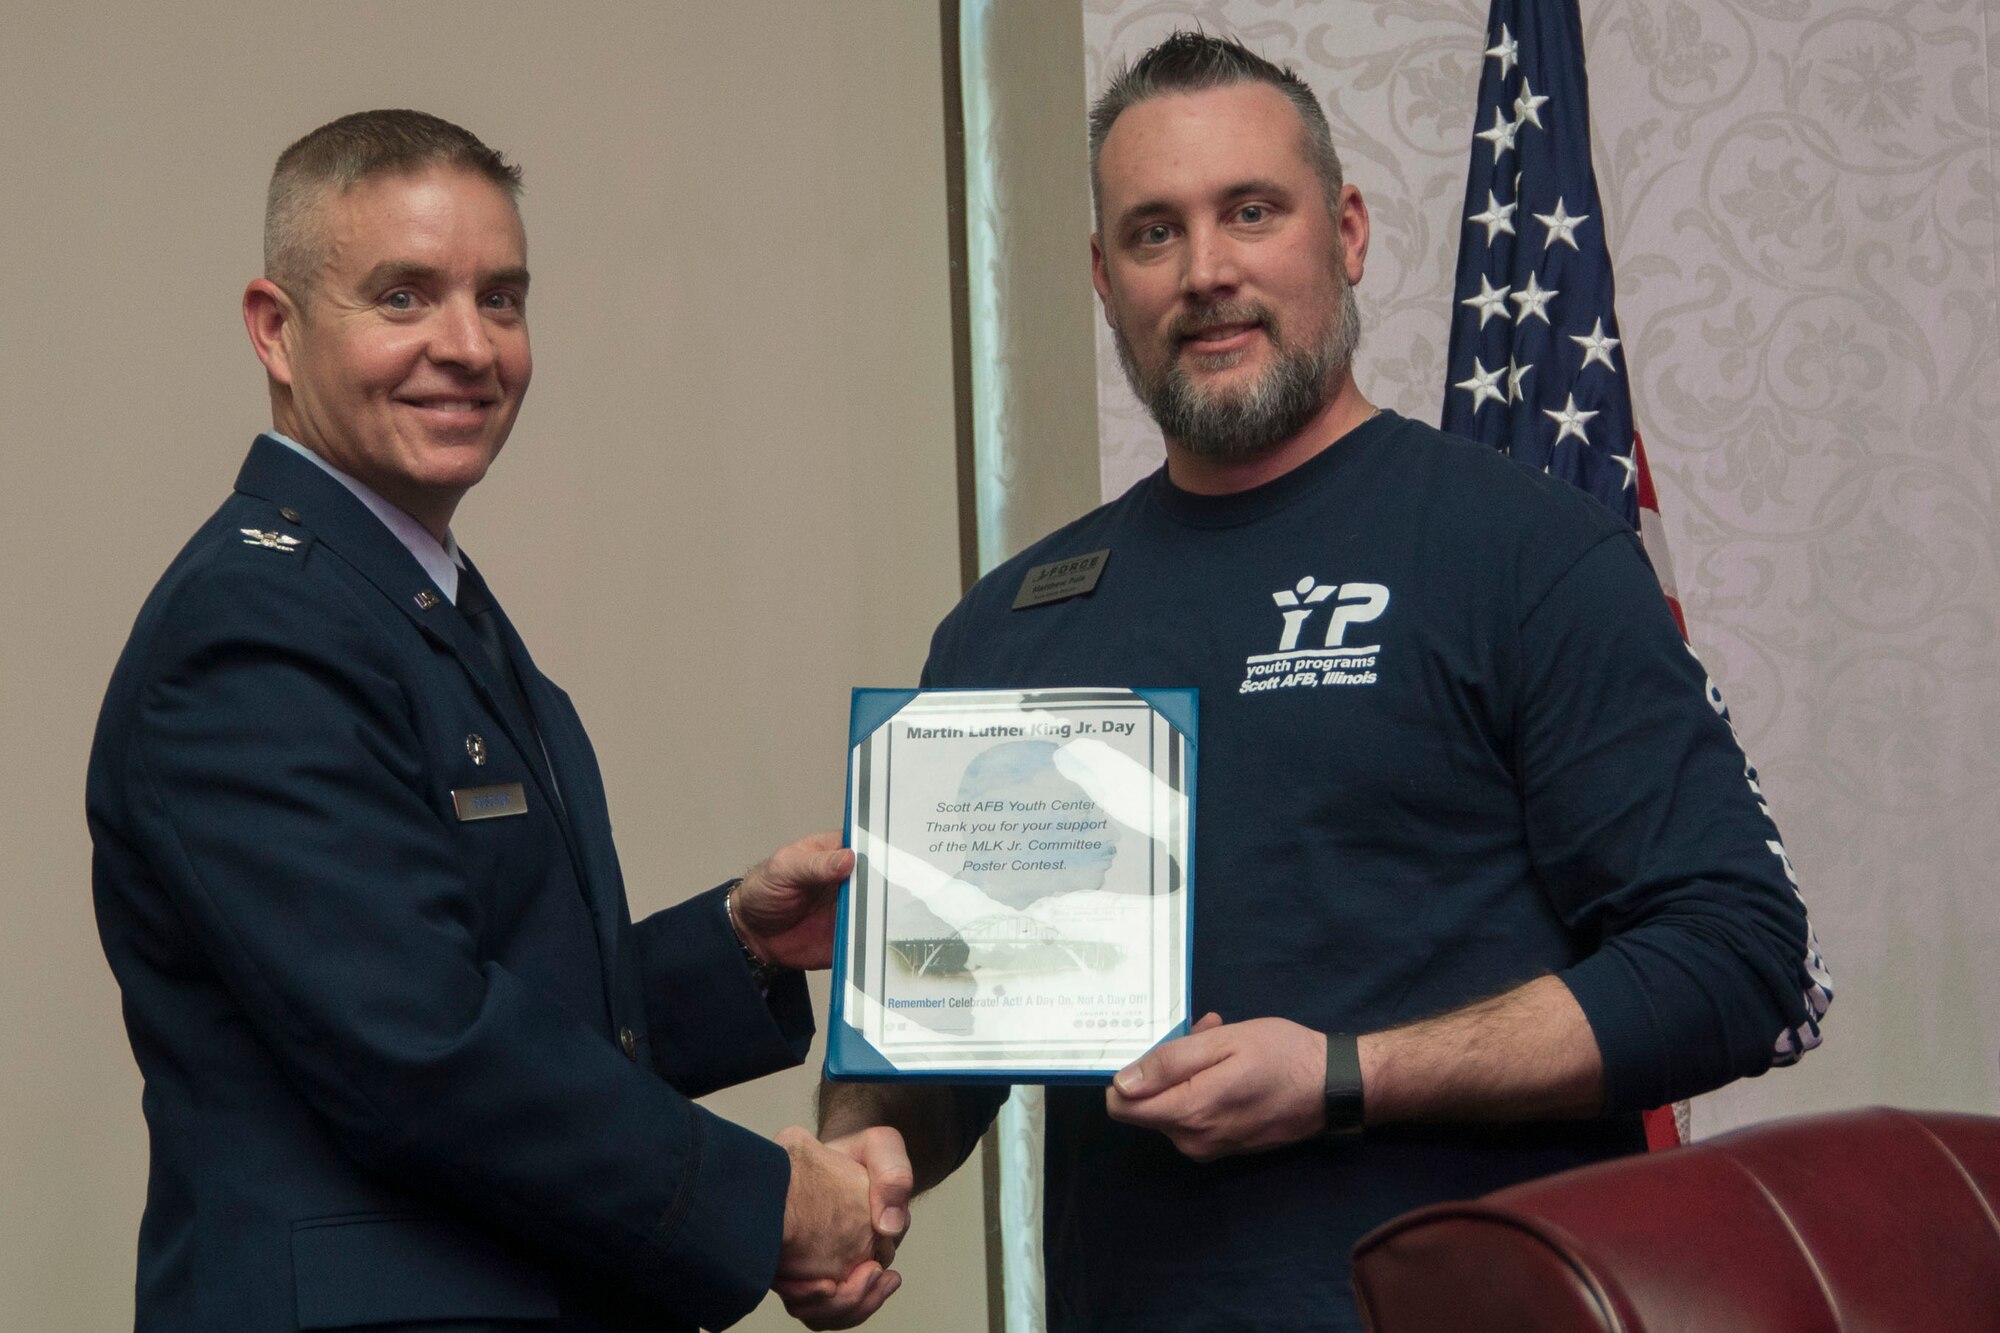 Col. Chris Buschur, 375th Air Mobility Wing commander, presents a certificate to the Scott Air Force Base Youth Center during the Dr. Martin Luther King, Jr., luncheon, Jan. 16, 2017, Scott AFB, Ill. Each room of the youth center participated in a poster design competition about what Dr. King’s legacy means. (U.S. Air Force photo by Senior Airman Melissa Estevez)